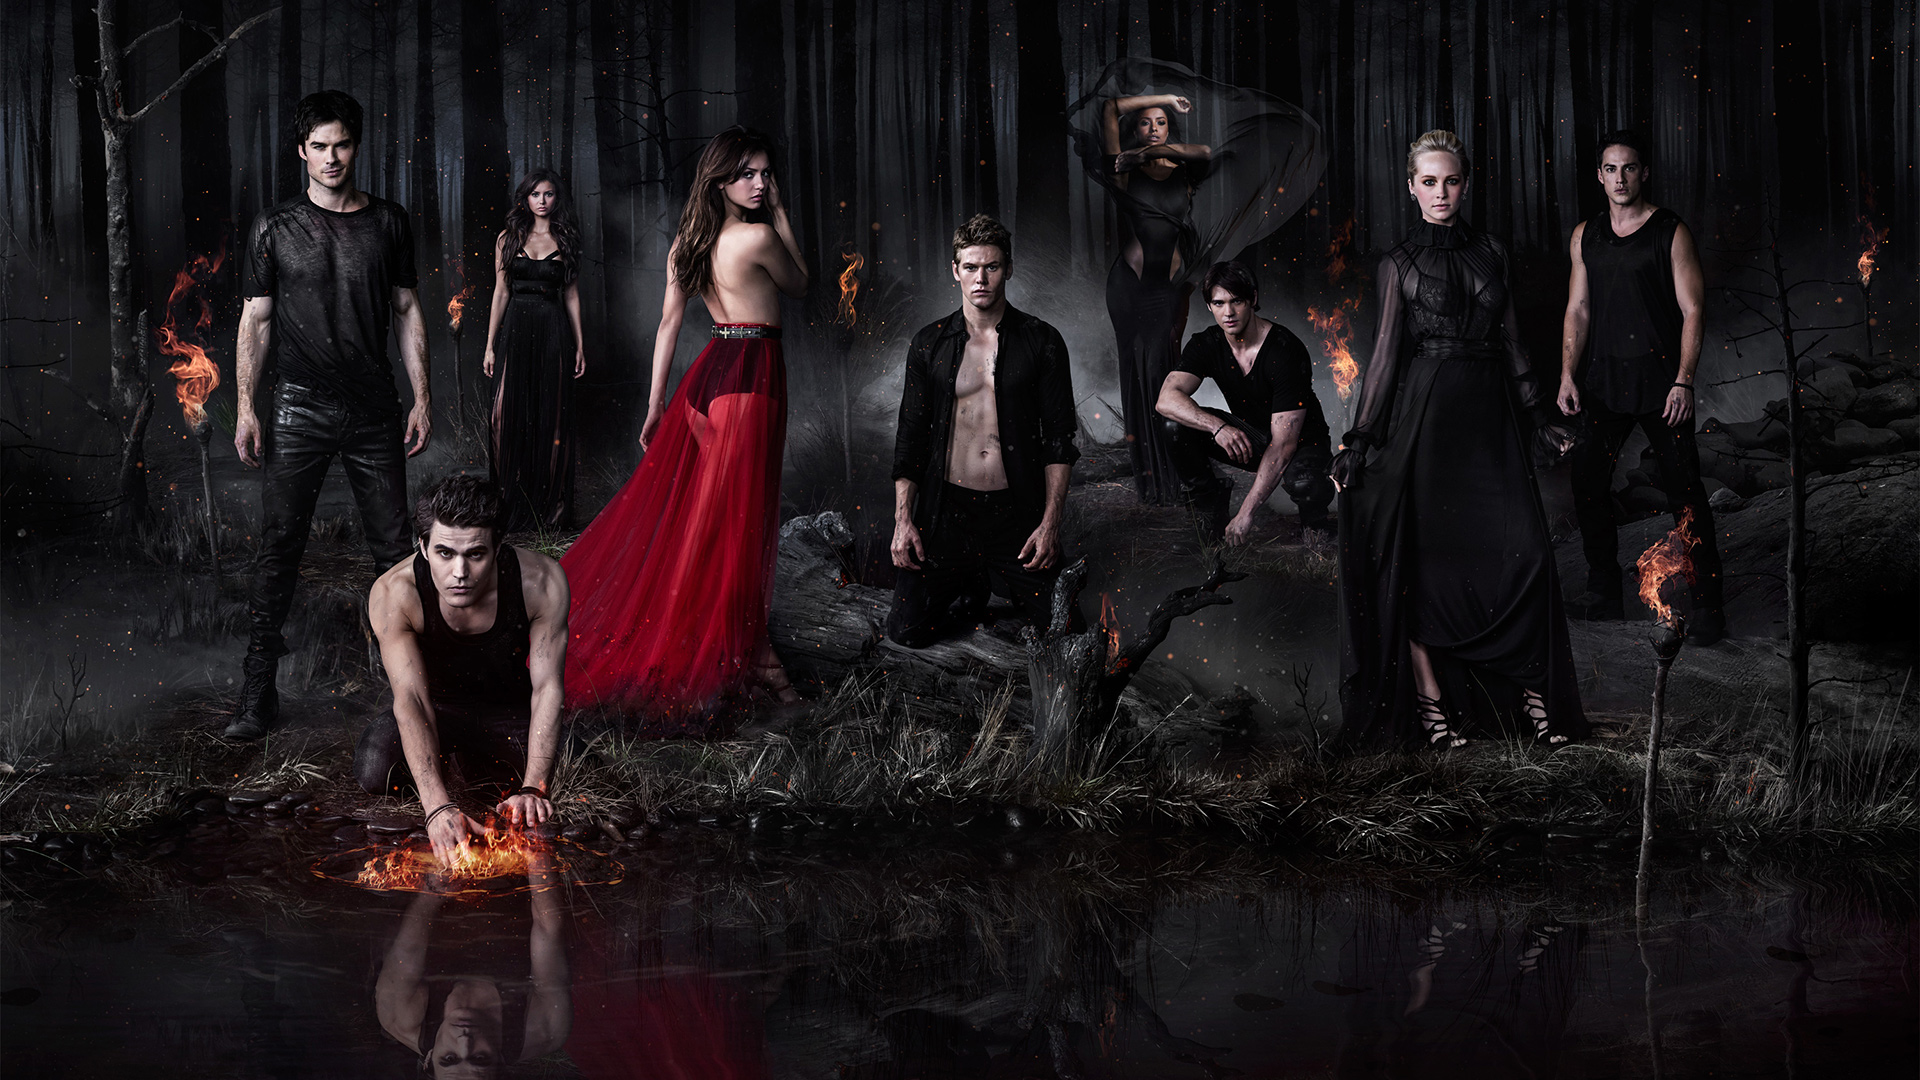 vampire diaries wallpaper,fashion,musical,darkness,event,performance